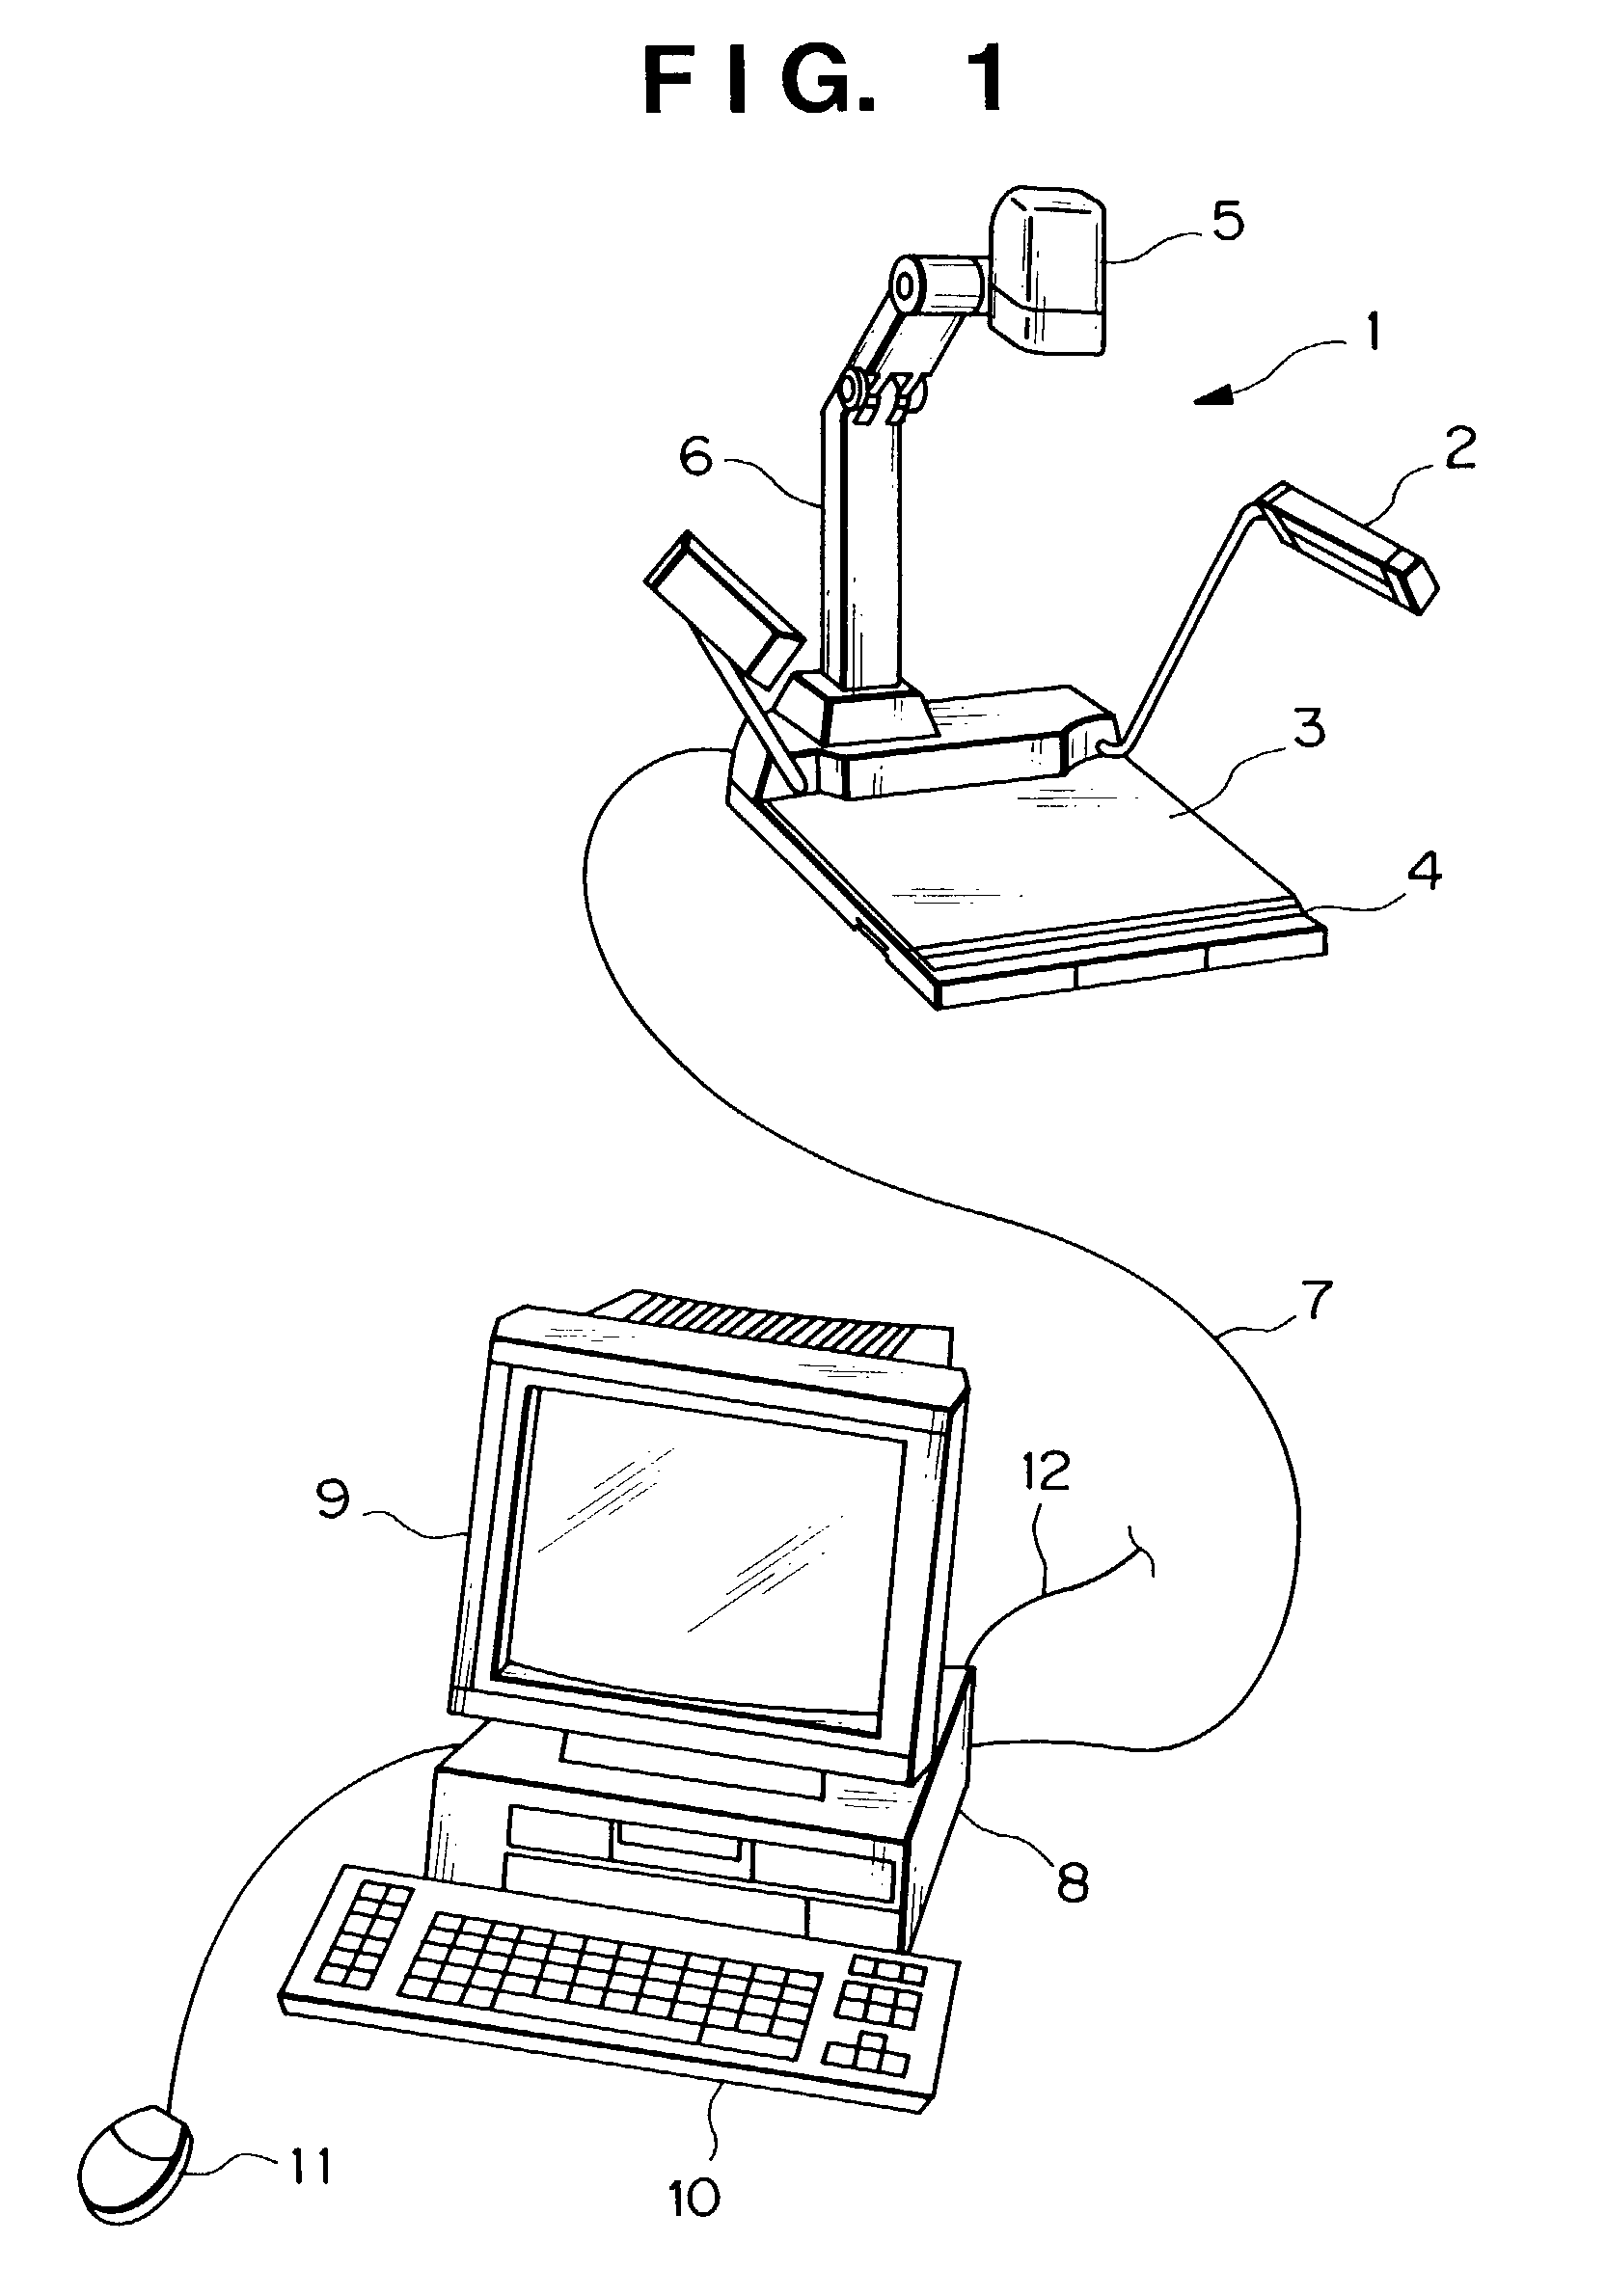 Image sensing apparatus and method having high and low resolution transfer modes